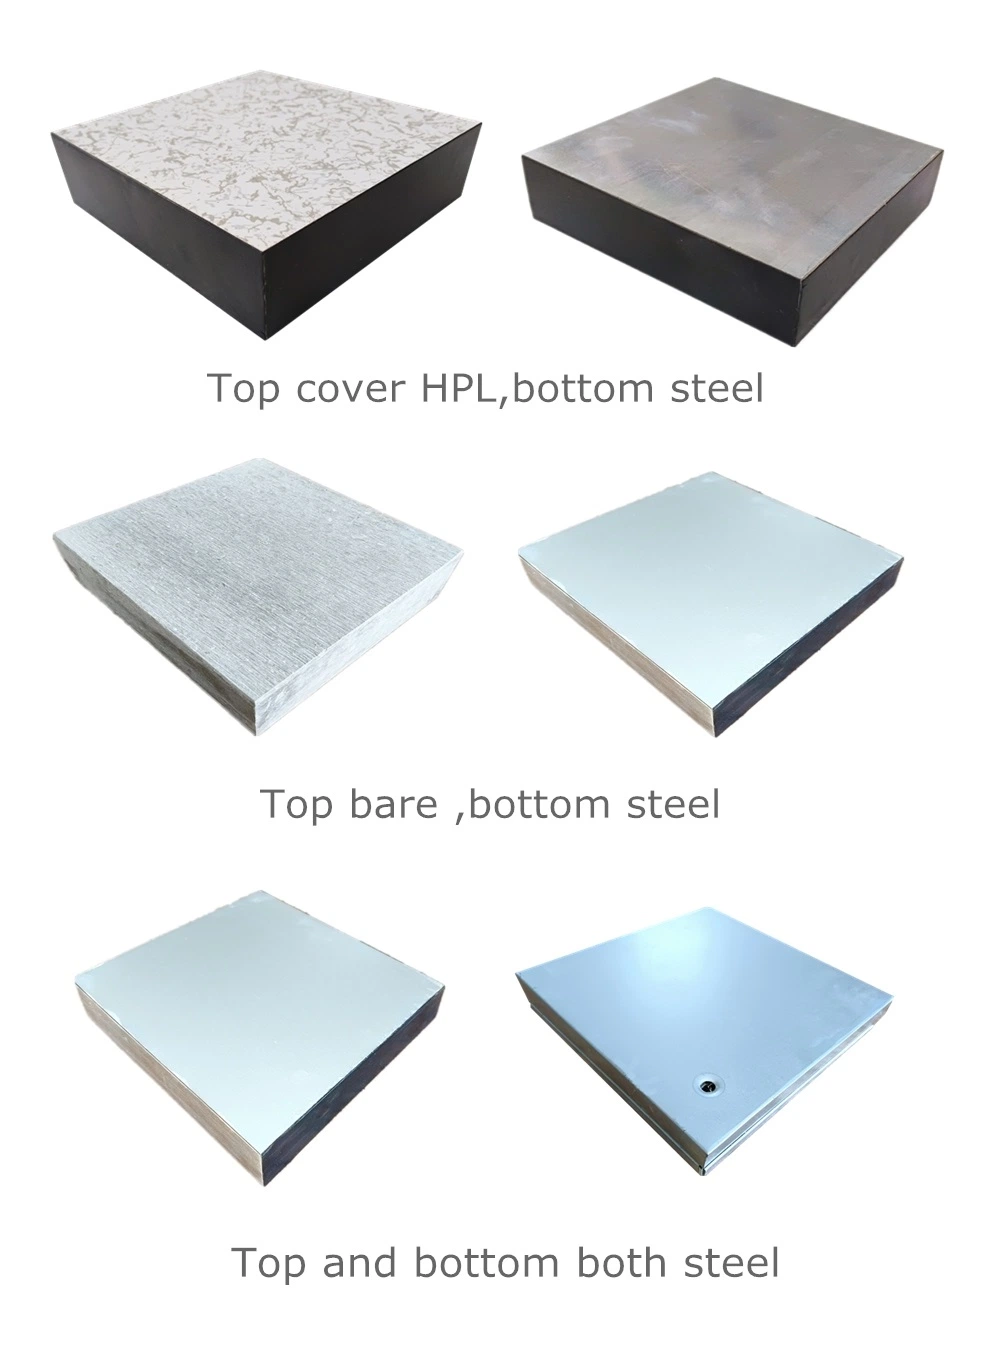 Calcium Sulfate Raised Access Panel Laminate Top Galvanized Steel Bound to The Bottom Four Sides Stick with Black PVC Sealed Trim